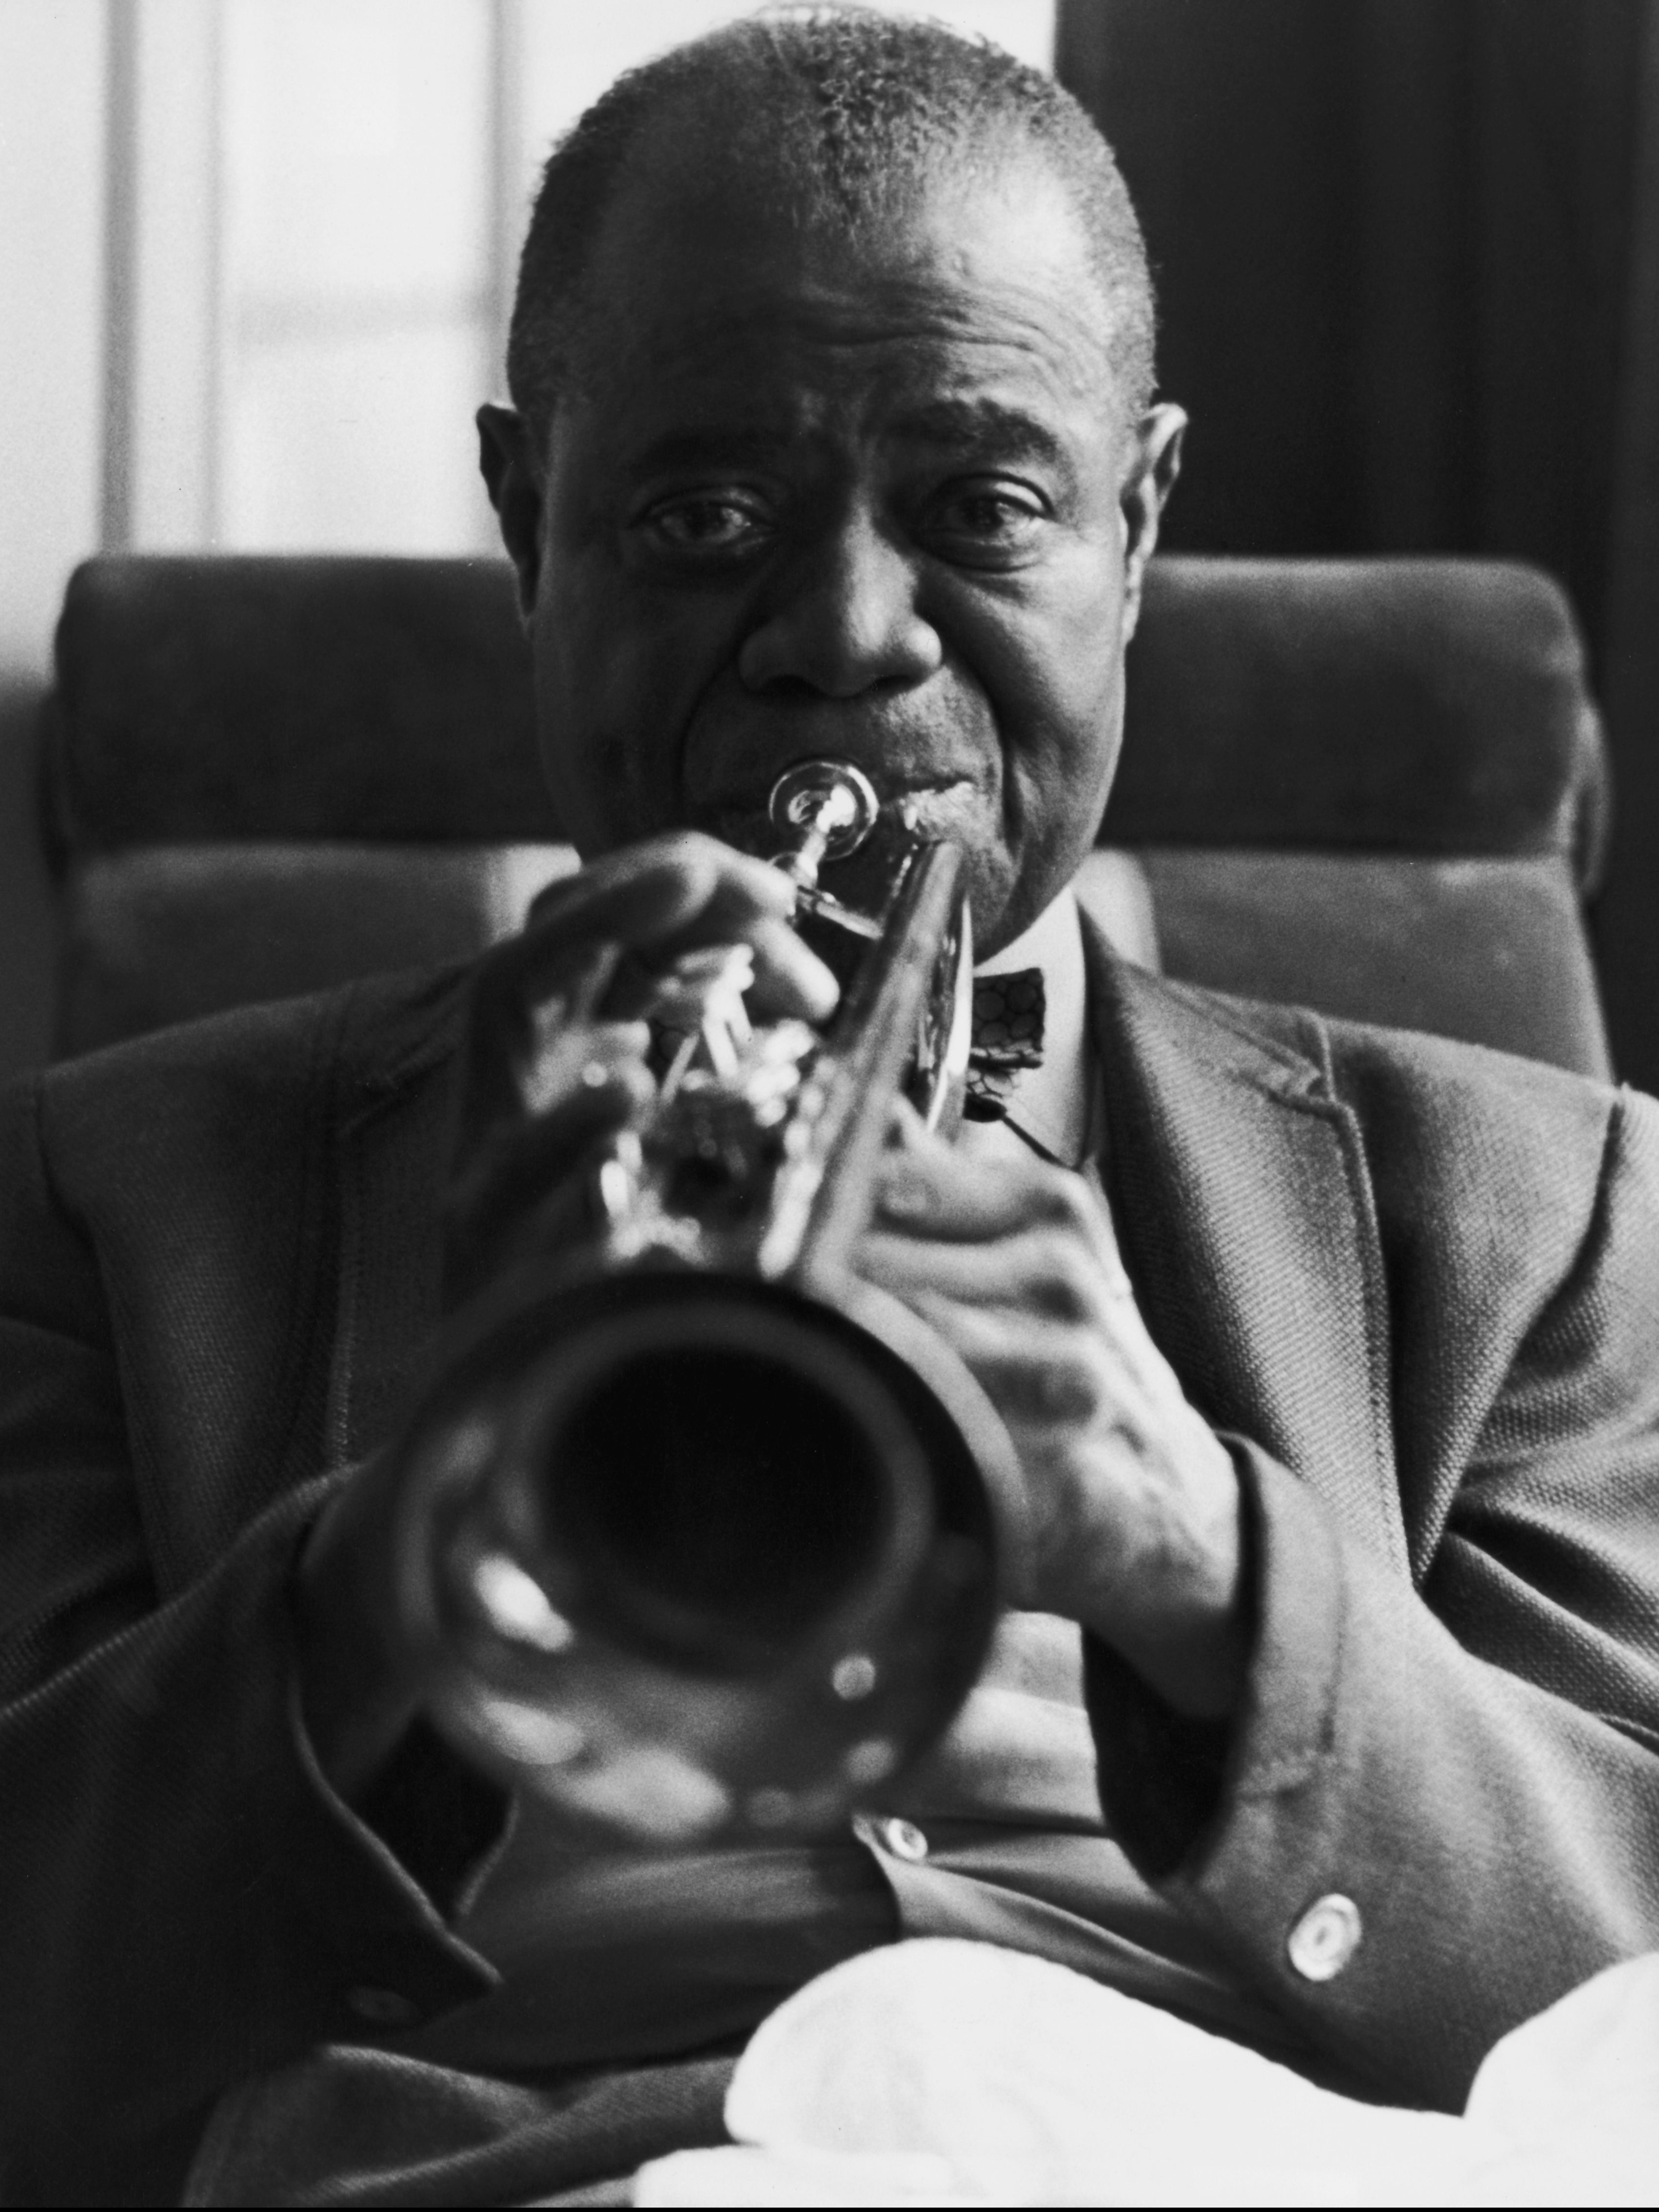 ‘His last nine months were tough’ – Louis Armstrong in 1970, the year before his death